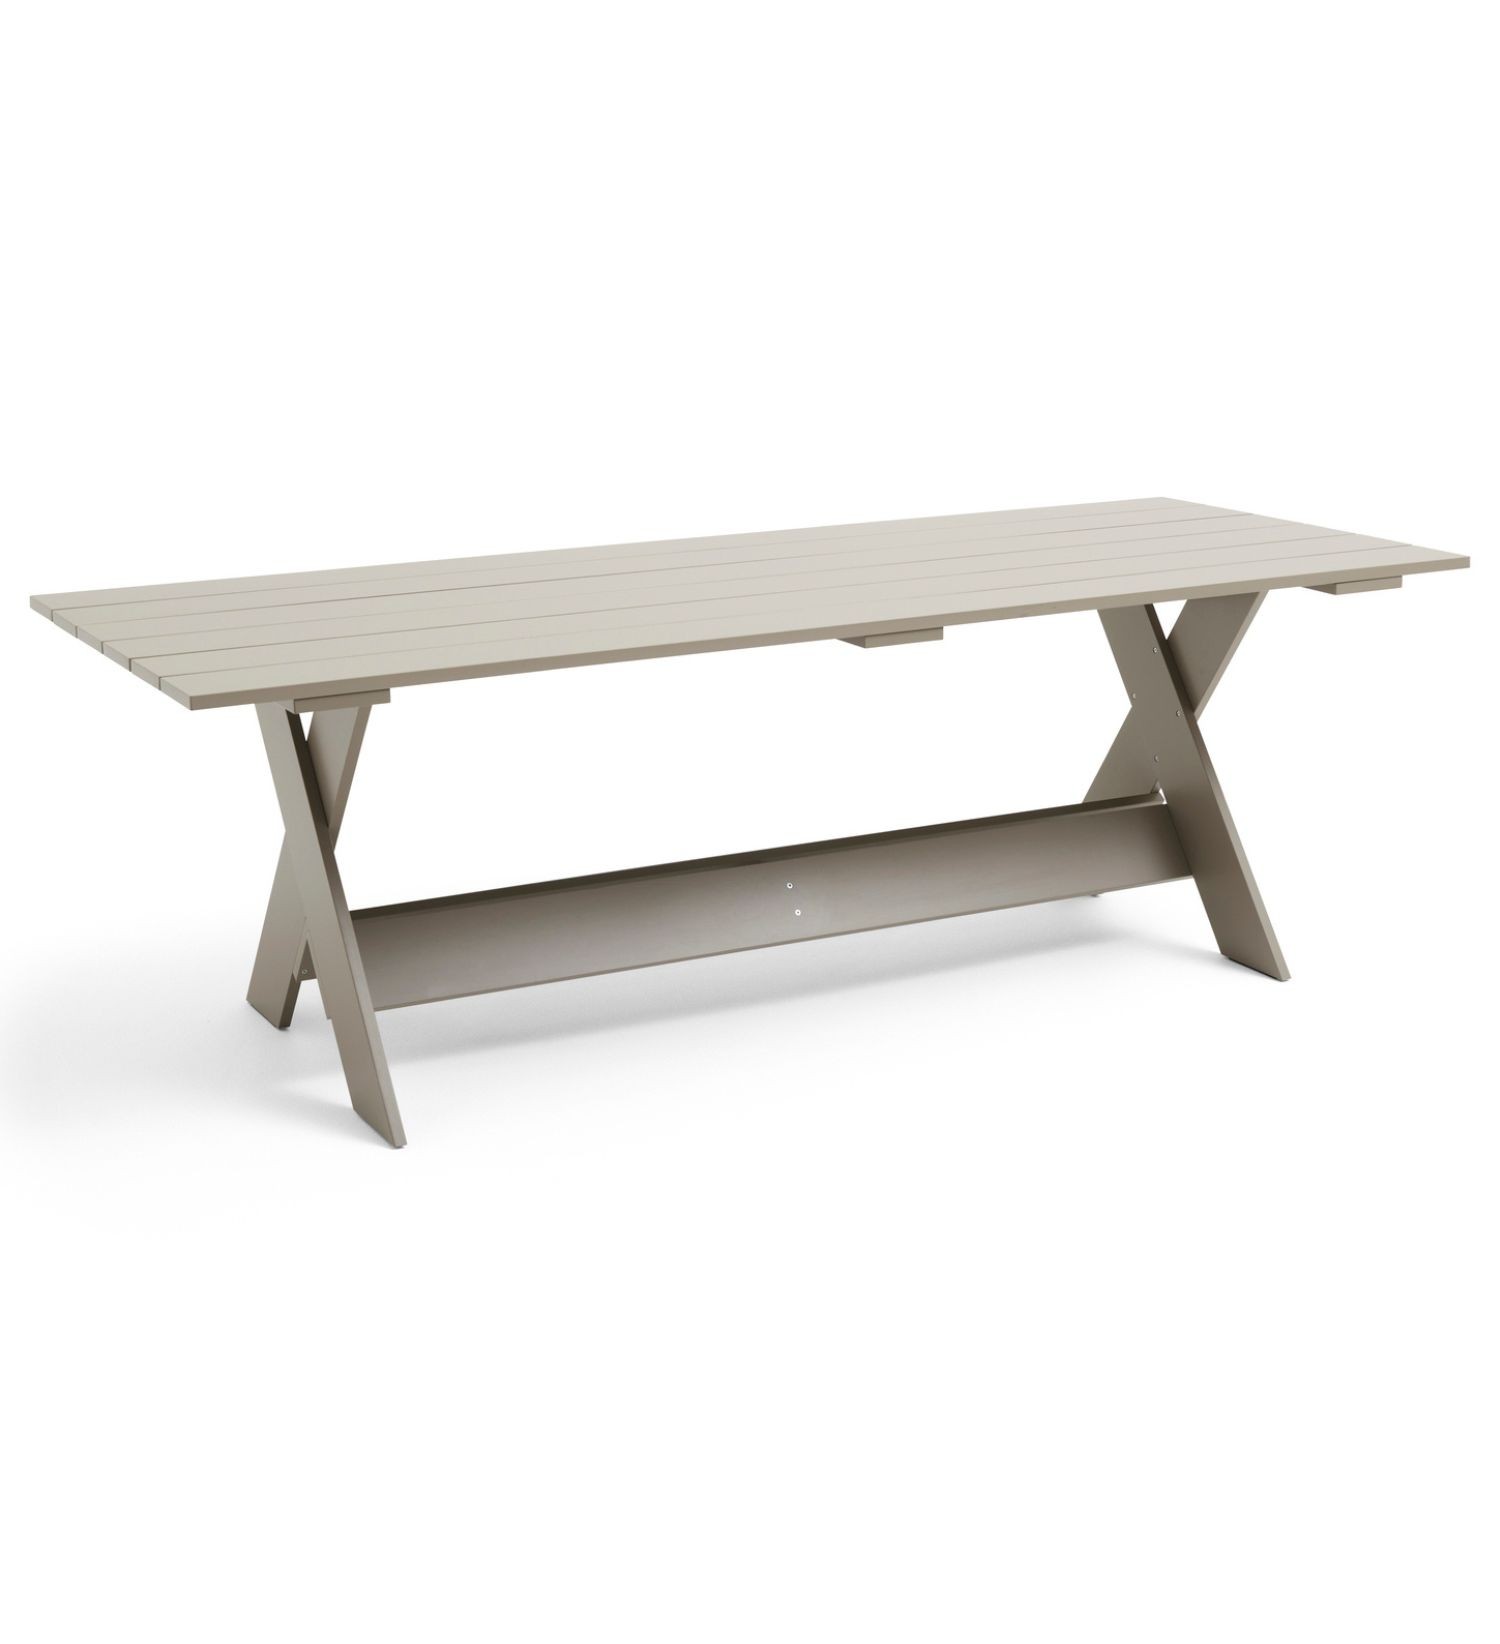 Stół ogrodowy Crate Dining Table marki HAY